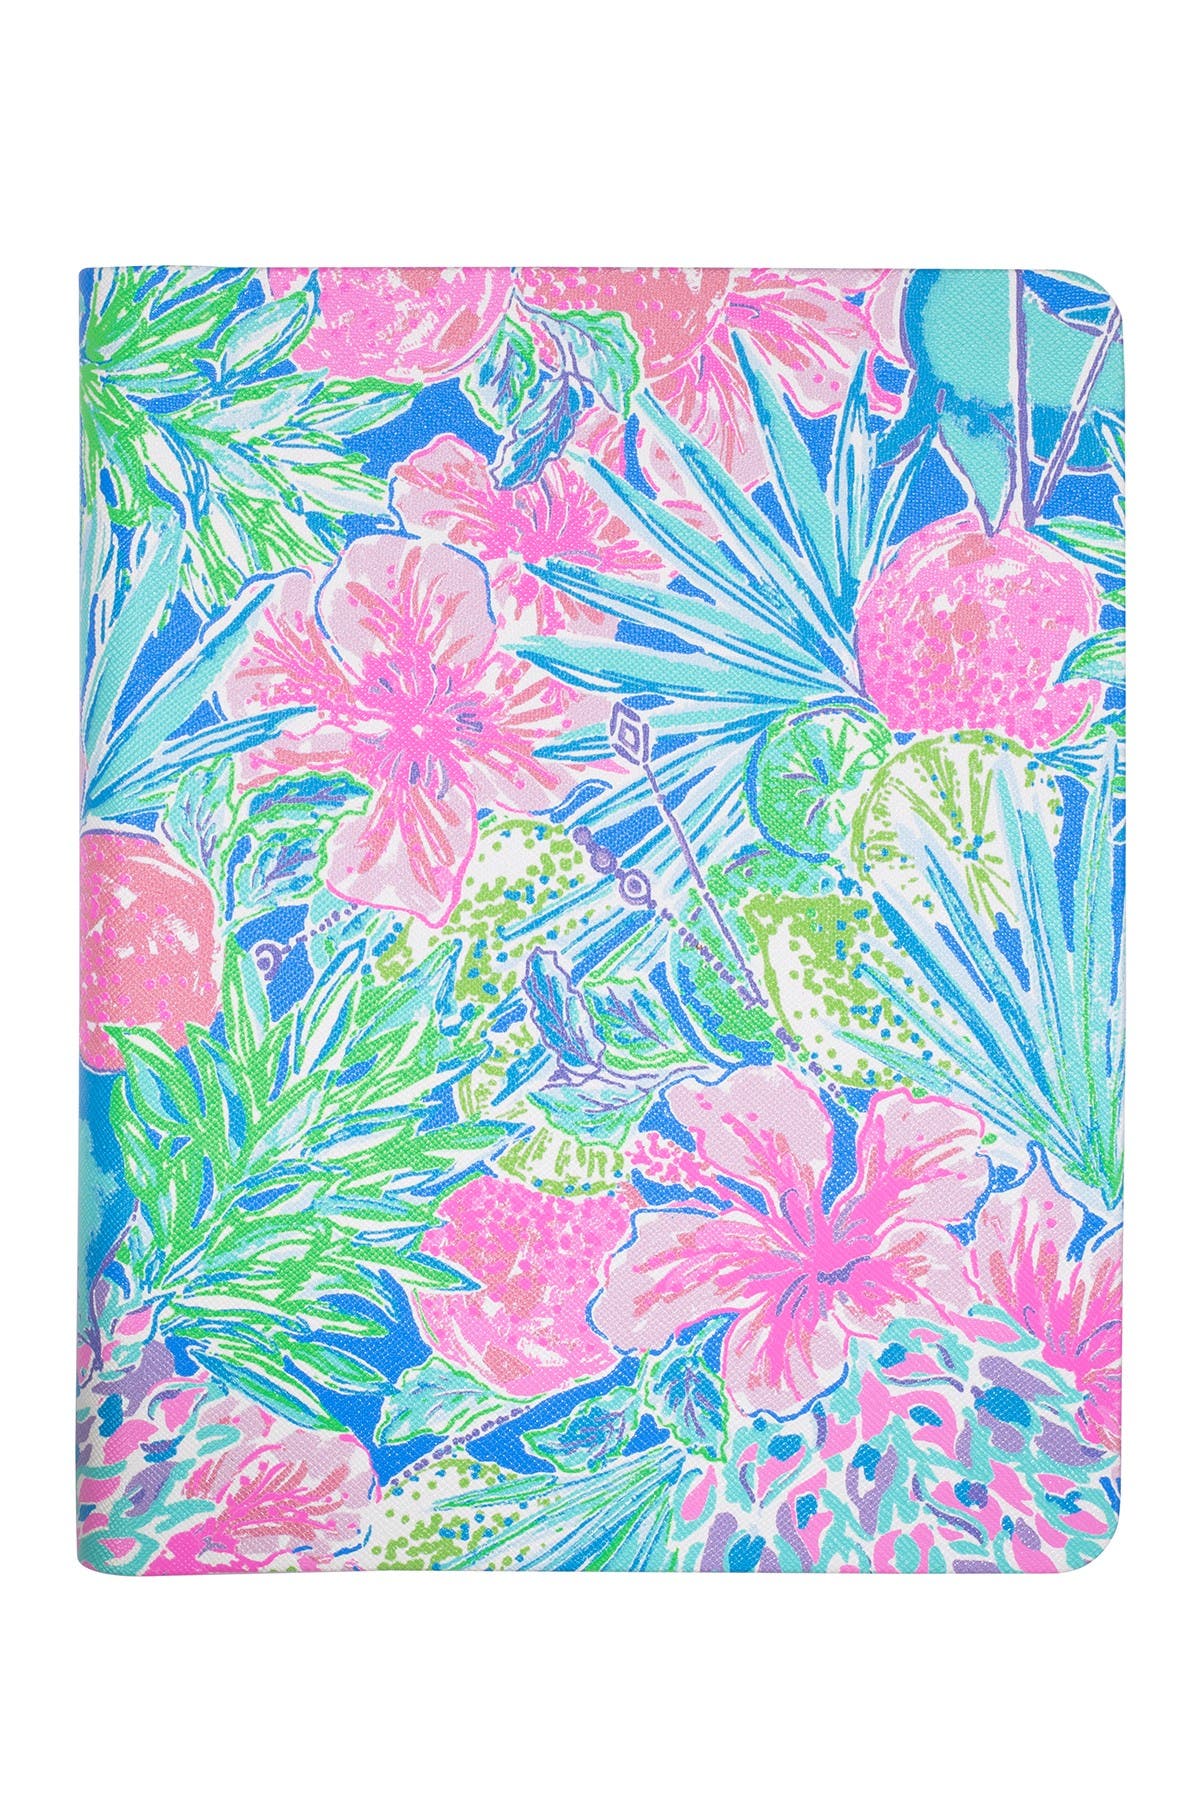 lilly pulitzer at nordstrom